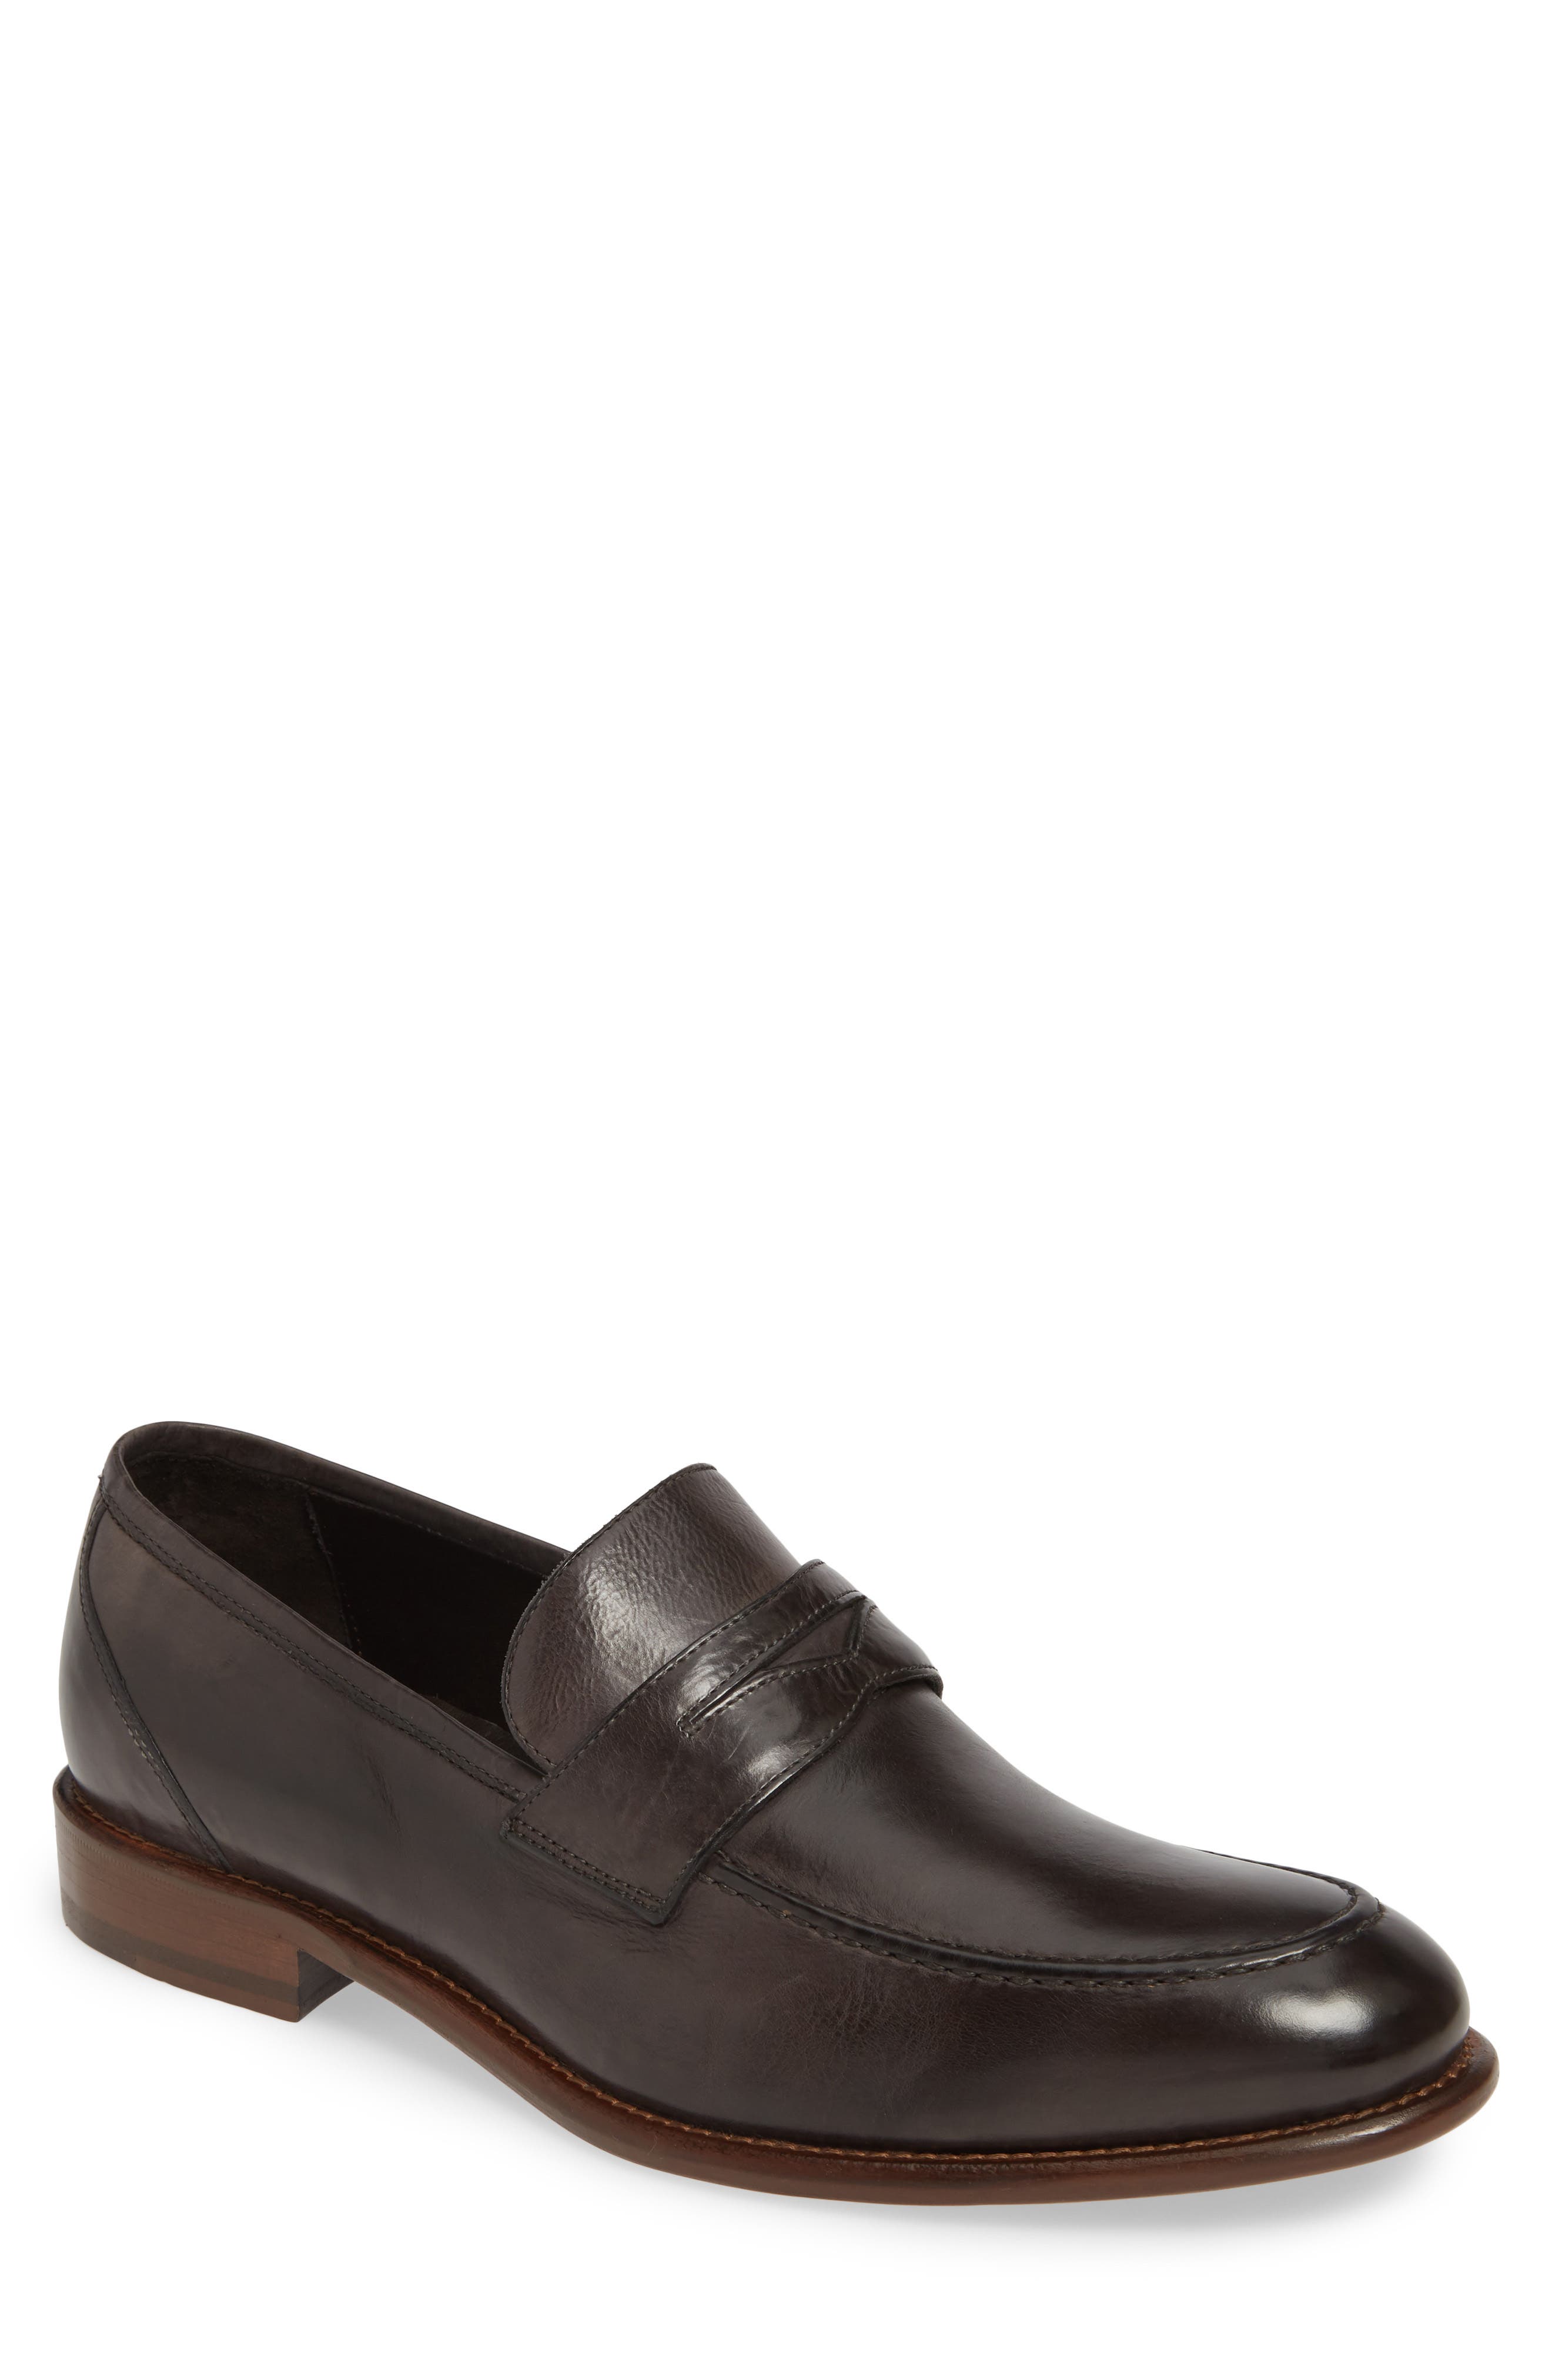 penny loafers school shoes